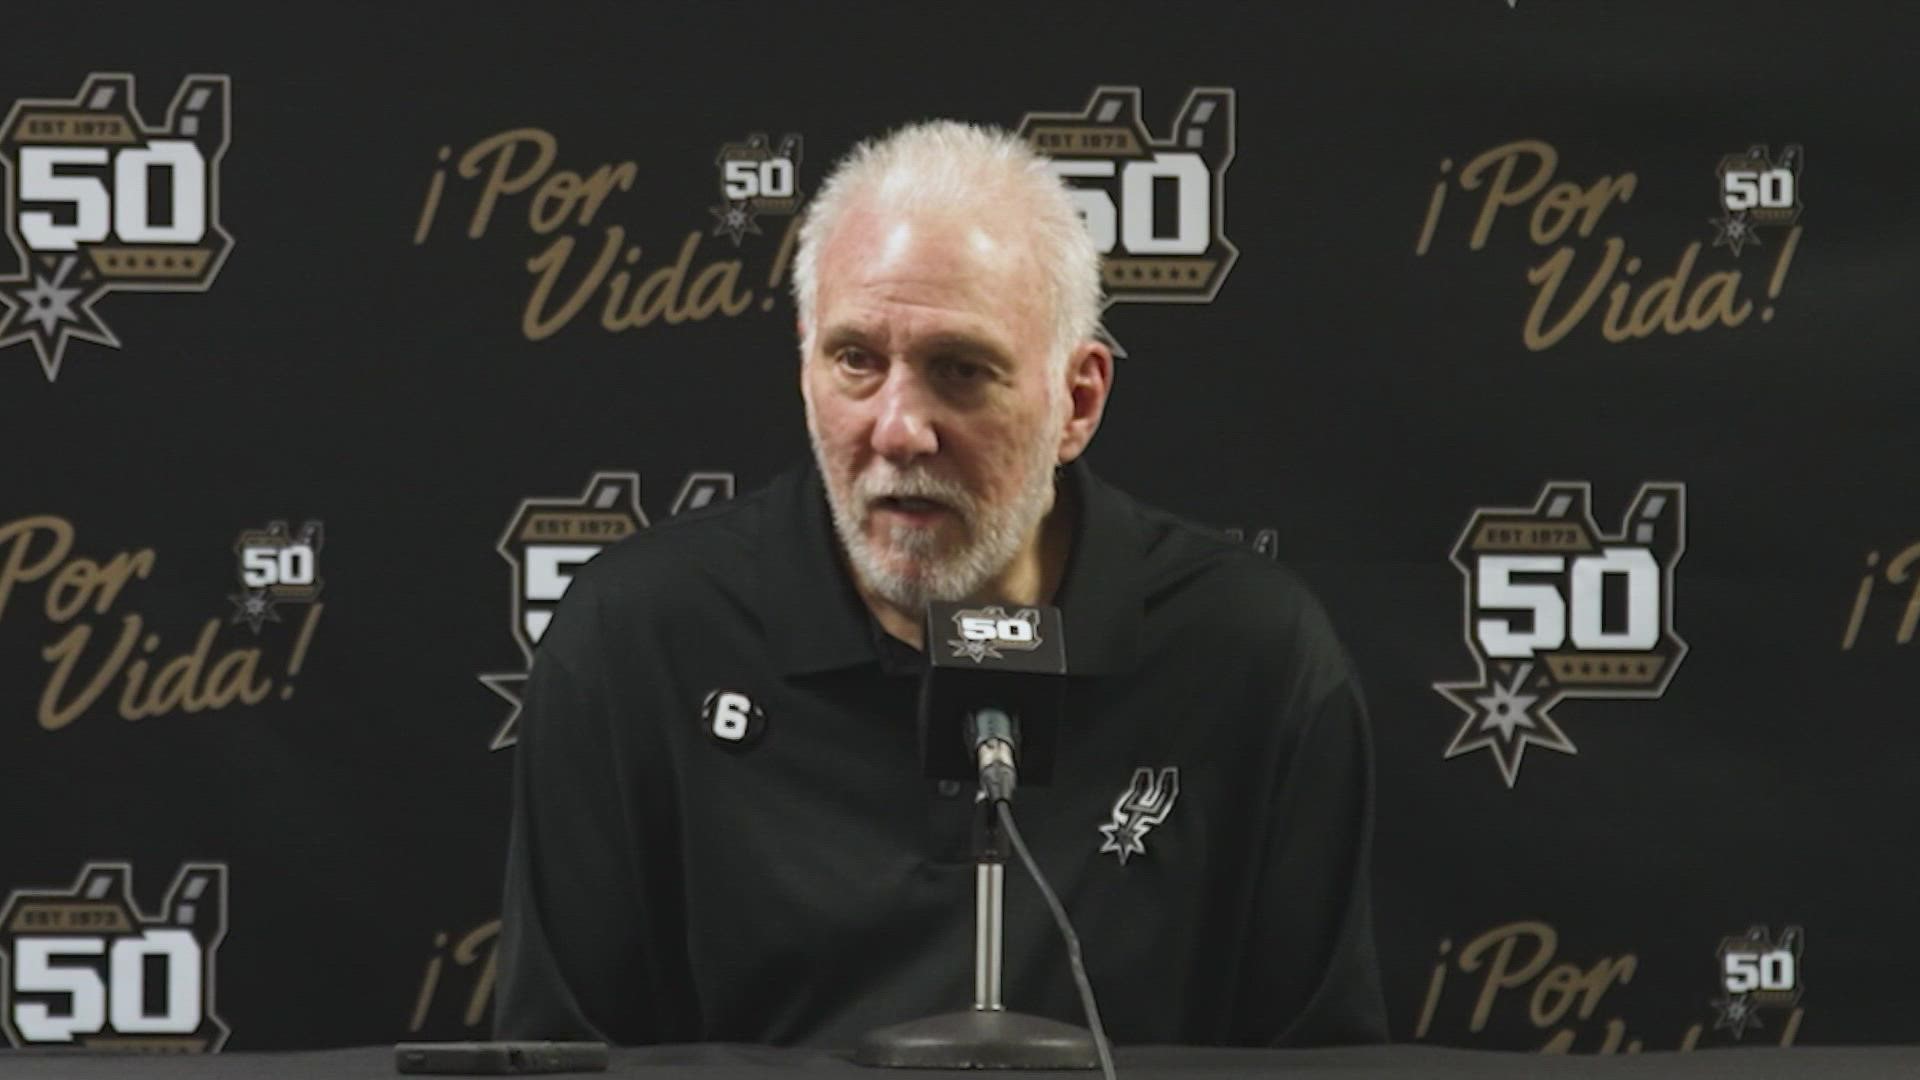 "Anybody that has observed the Spurs over a very long period of time knows that an accusation like this would be taken very seriously," Popovich said in part.